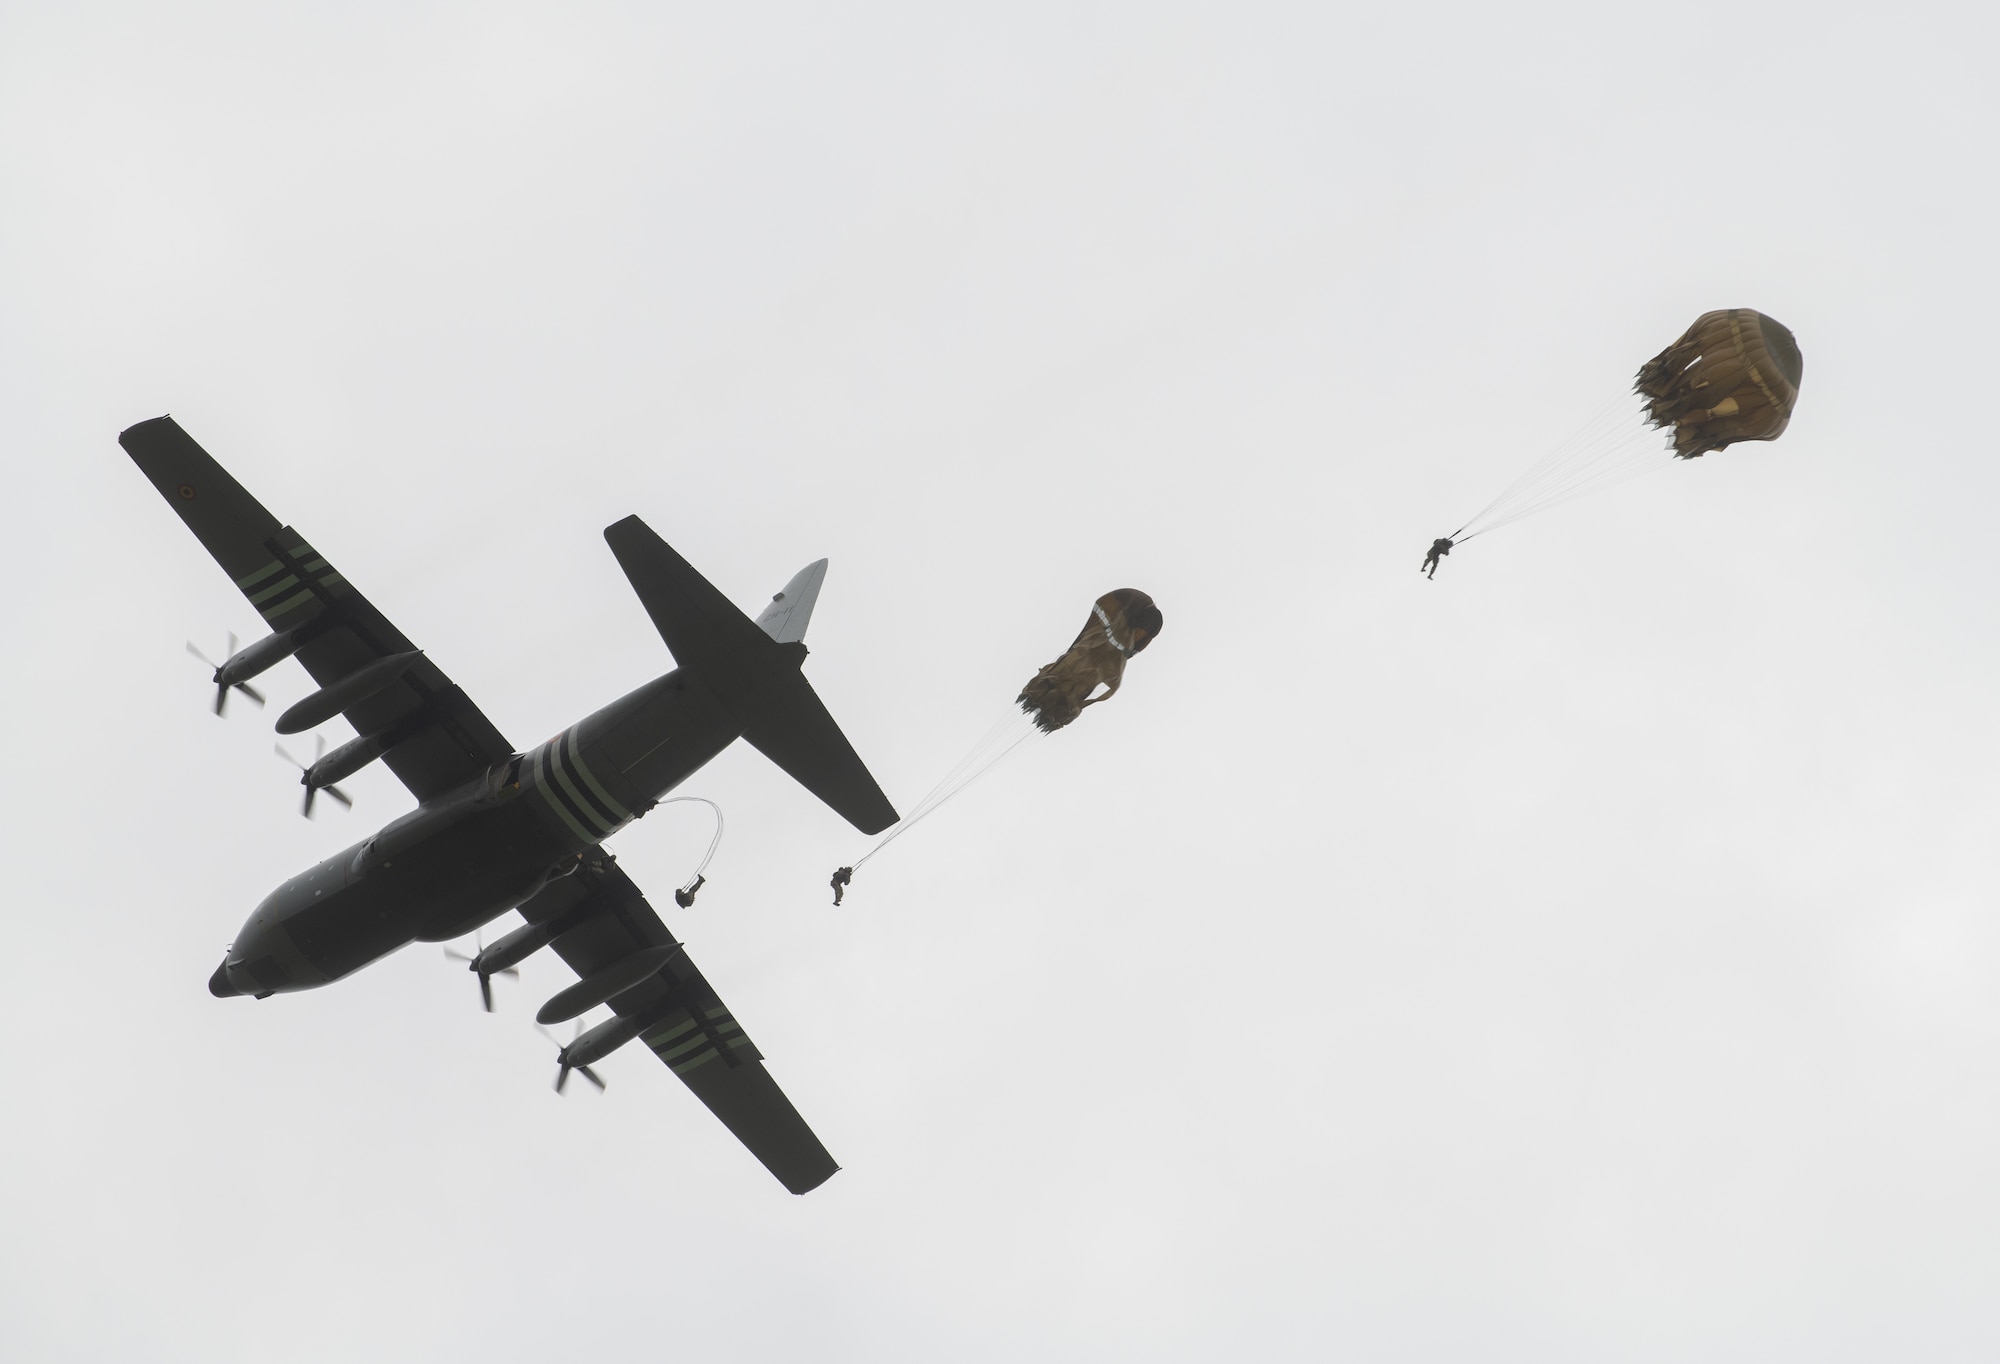 More than 1,100 parachutes sailed above Sainte-Mere-Eglise, France, to commemorate the 75th Anniversary of D-Day June 9, 2019. Nineteen aircraft from multiple nations and parachute jumpers from Belgium, France, Germany, the Netherlands, Romania, United Kingdom and the United States dropped civilians and Soldiers in front of thousands of spectators. (U.S. Air Force photo by Airman 1st Class Jennifer Zima)